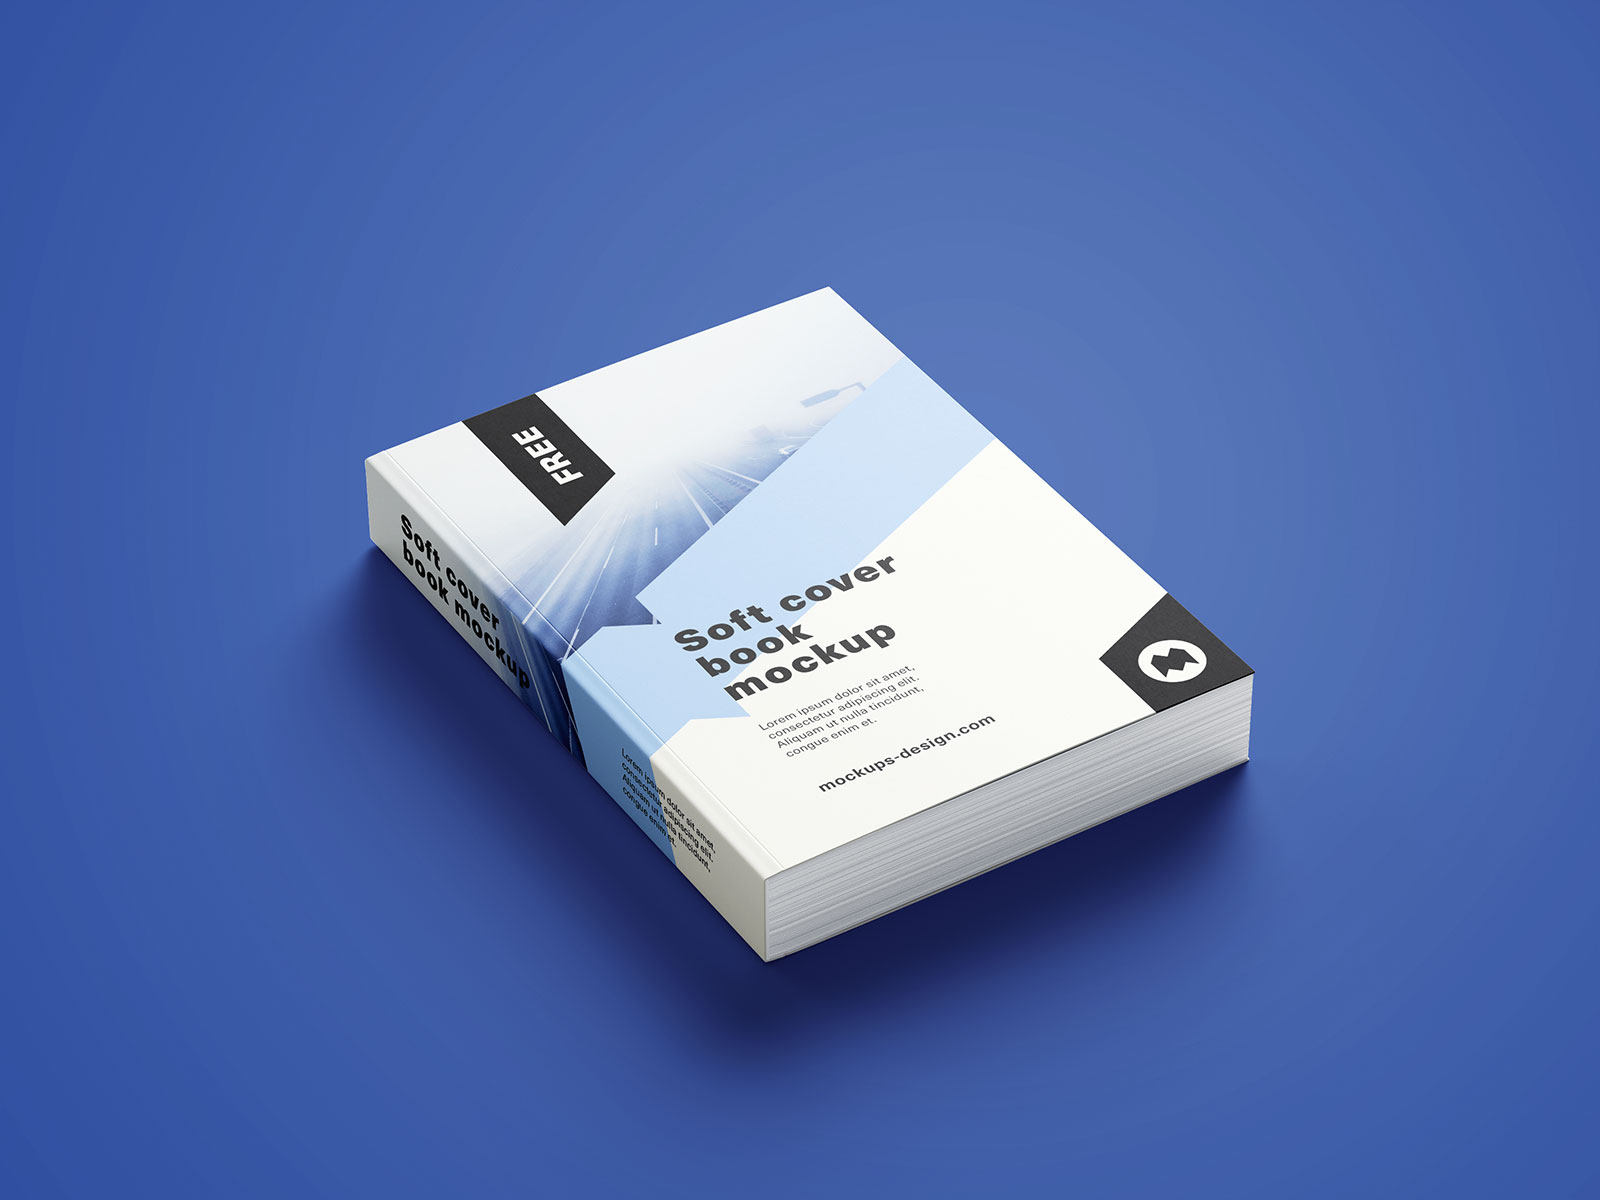 Softcover Book Mockup Set (11 Files)